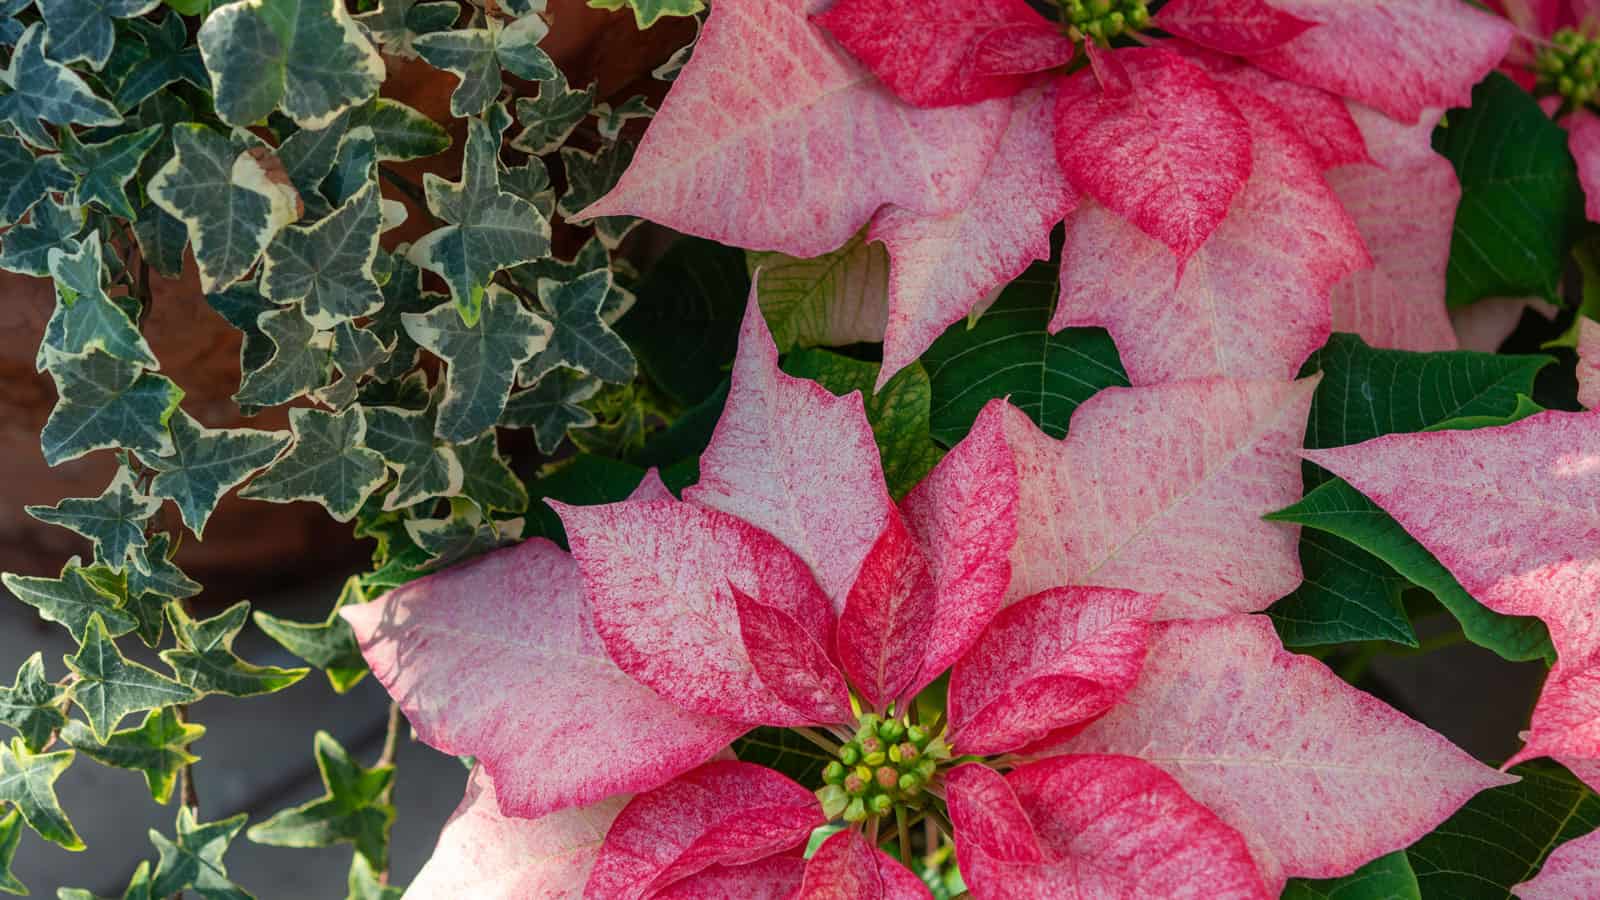 Mixture of bright pink and white colors of a marble star poinsettia